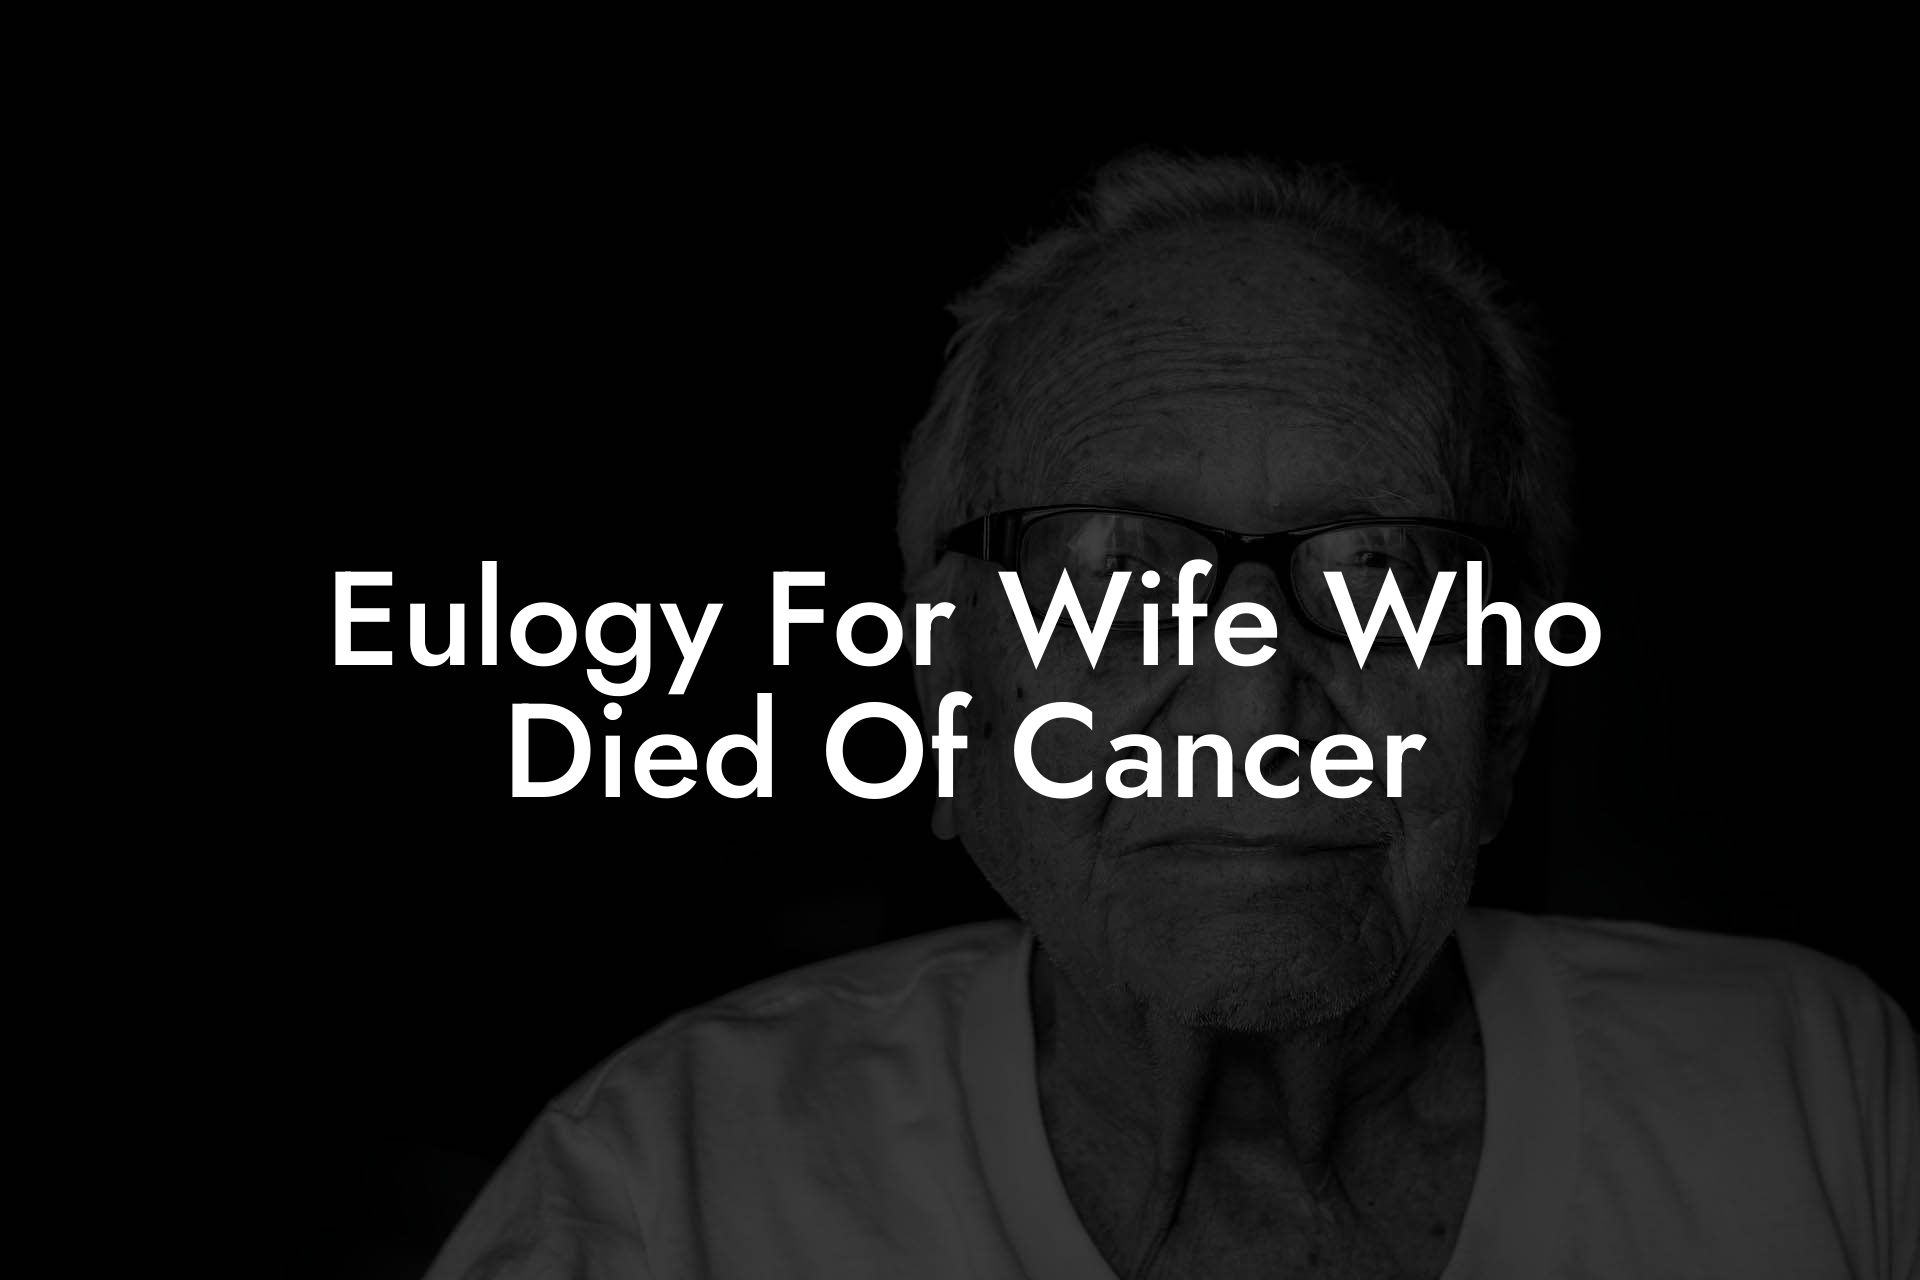 Eulogy For Wife Who Died Of Cancer